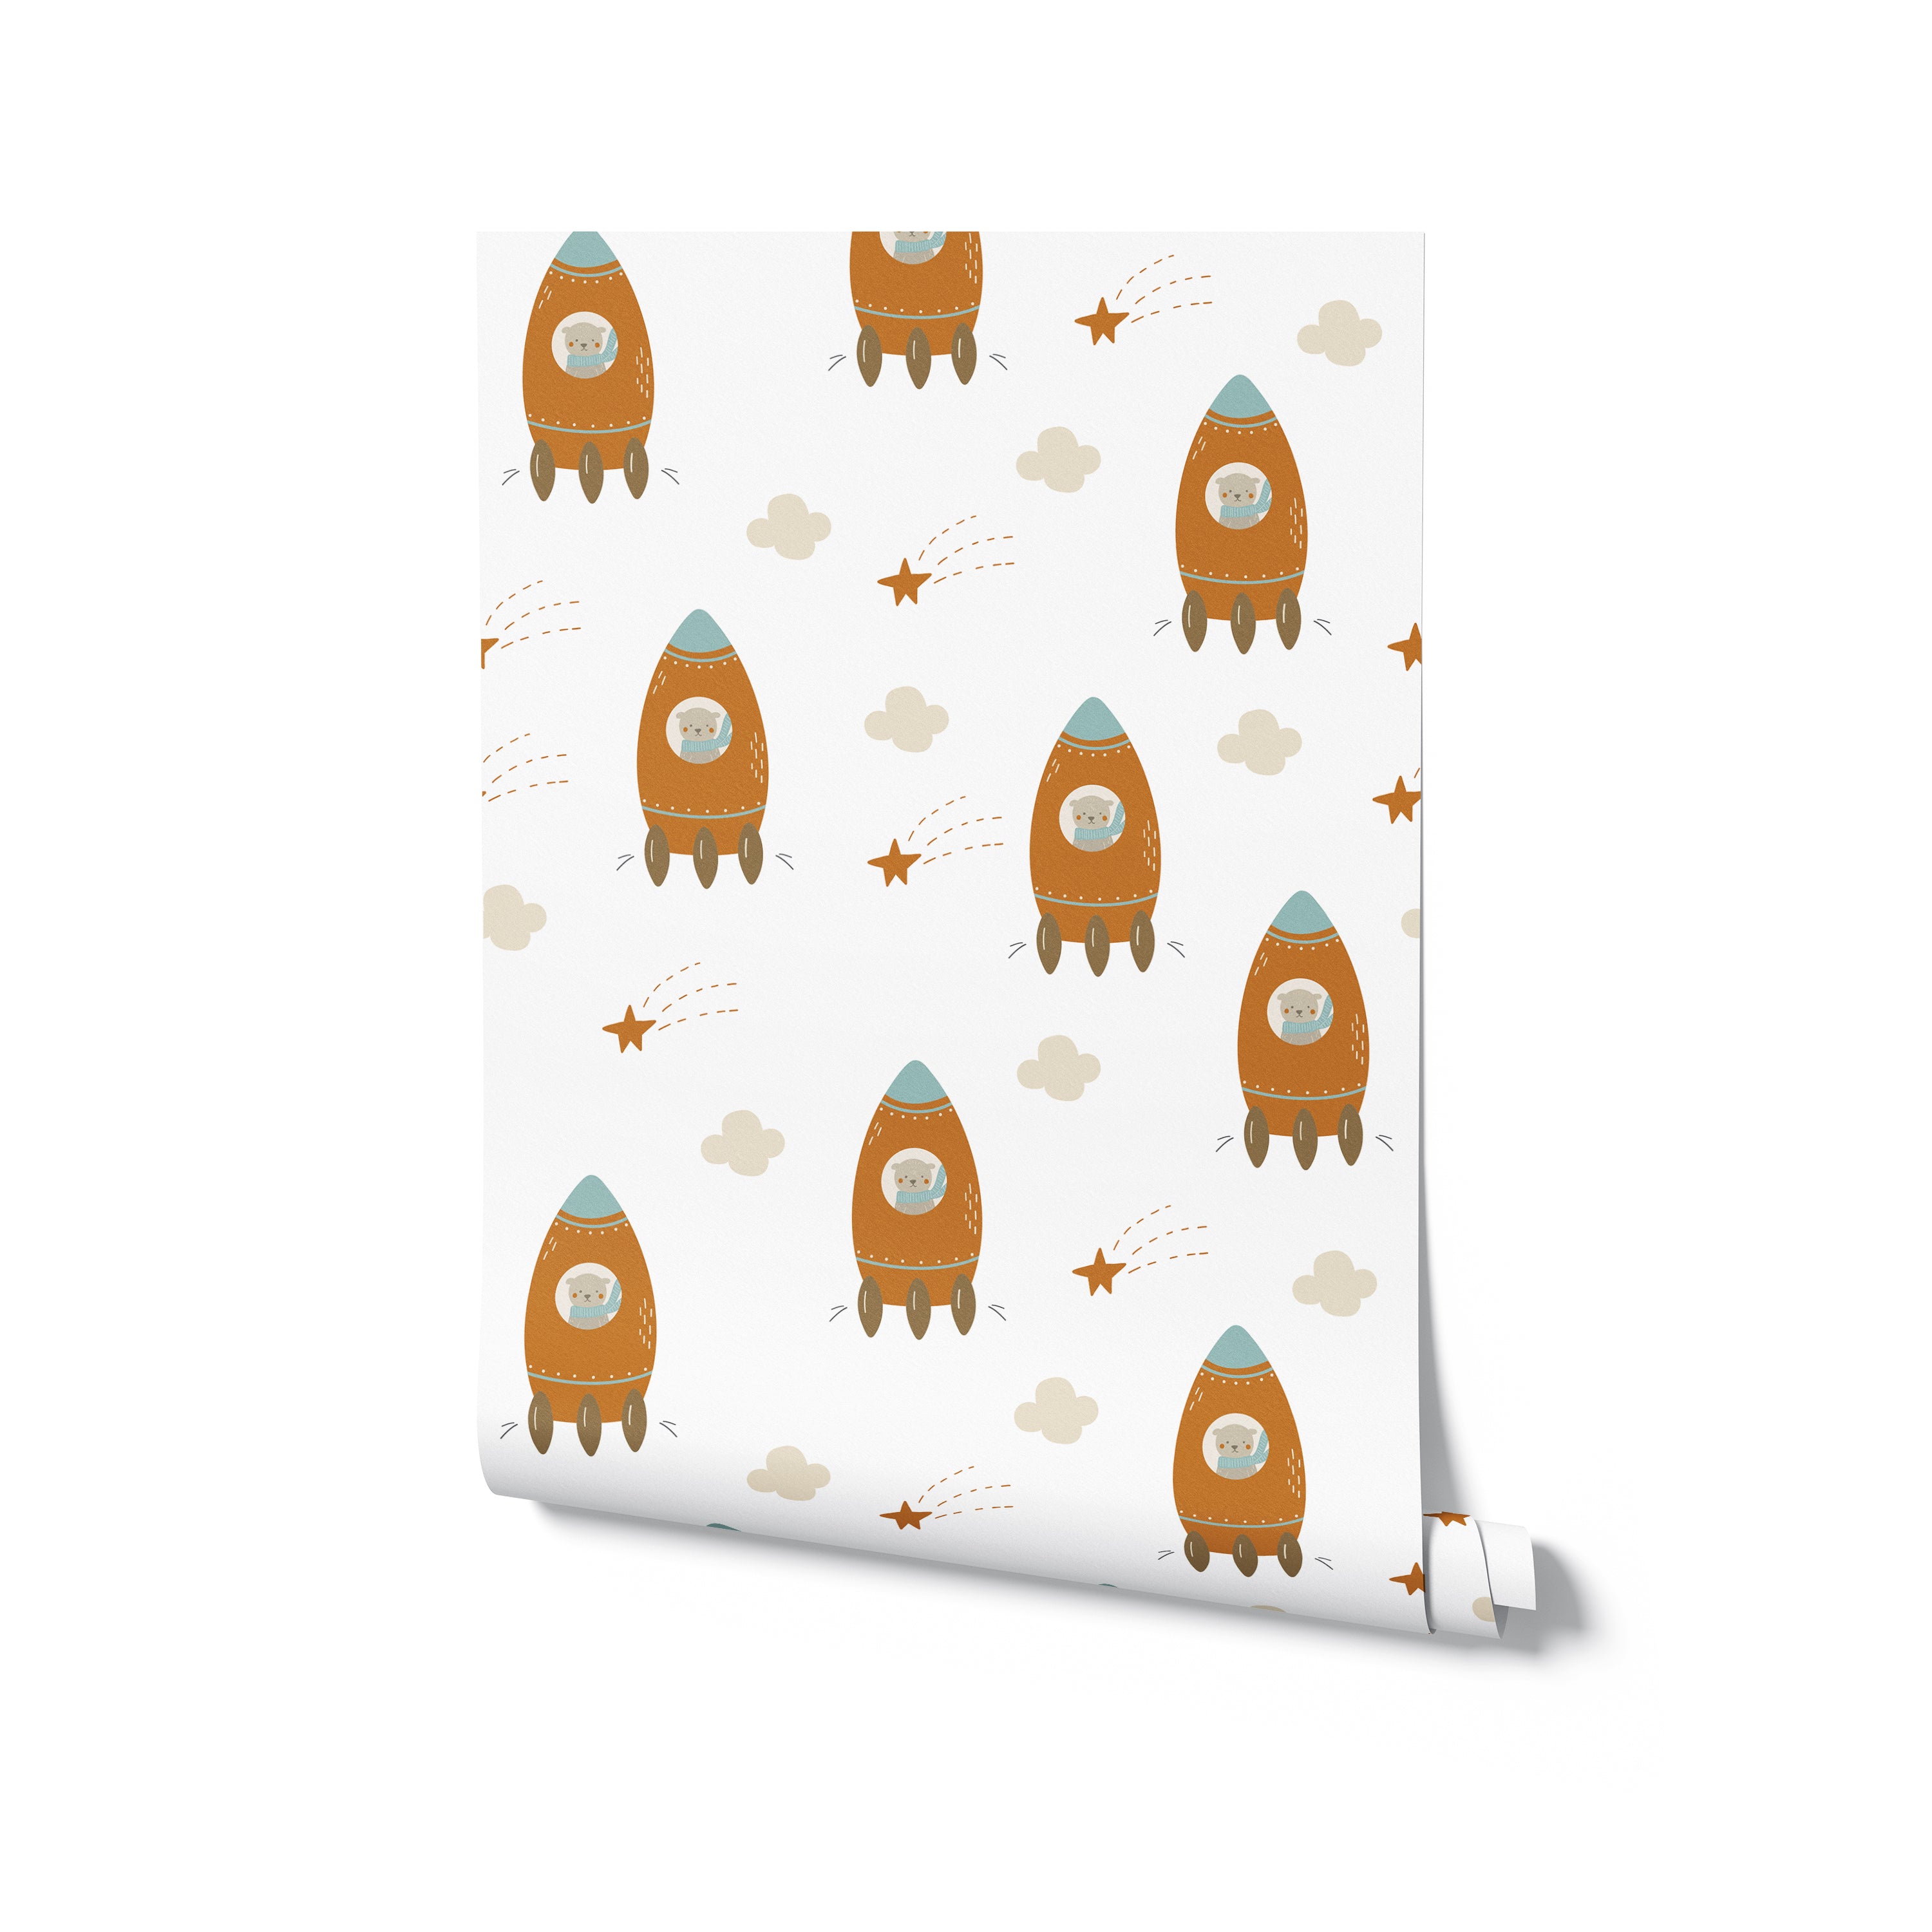 A roll of Rocket Time Wallpaper displaying a repeating pattern of orange rockets carrying teddy bear astronauts, surrounded by clouds and stars on a white background, ideal for decorating children's rooms.